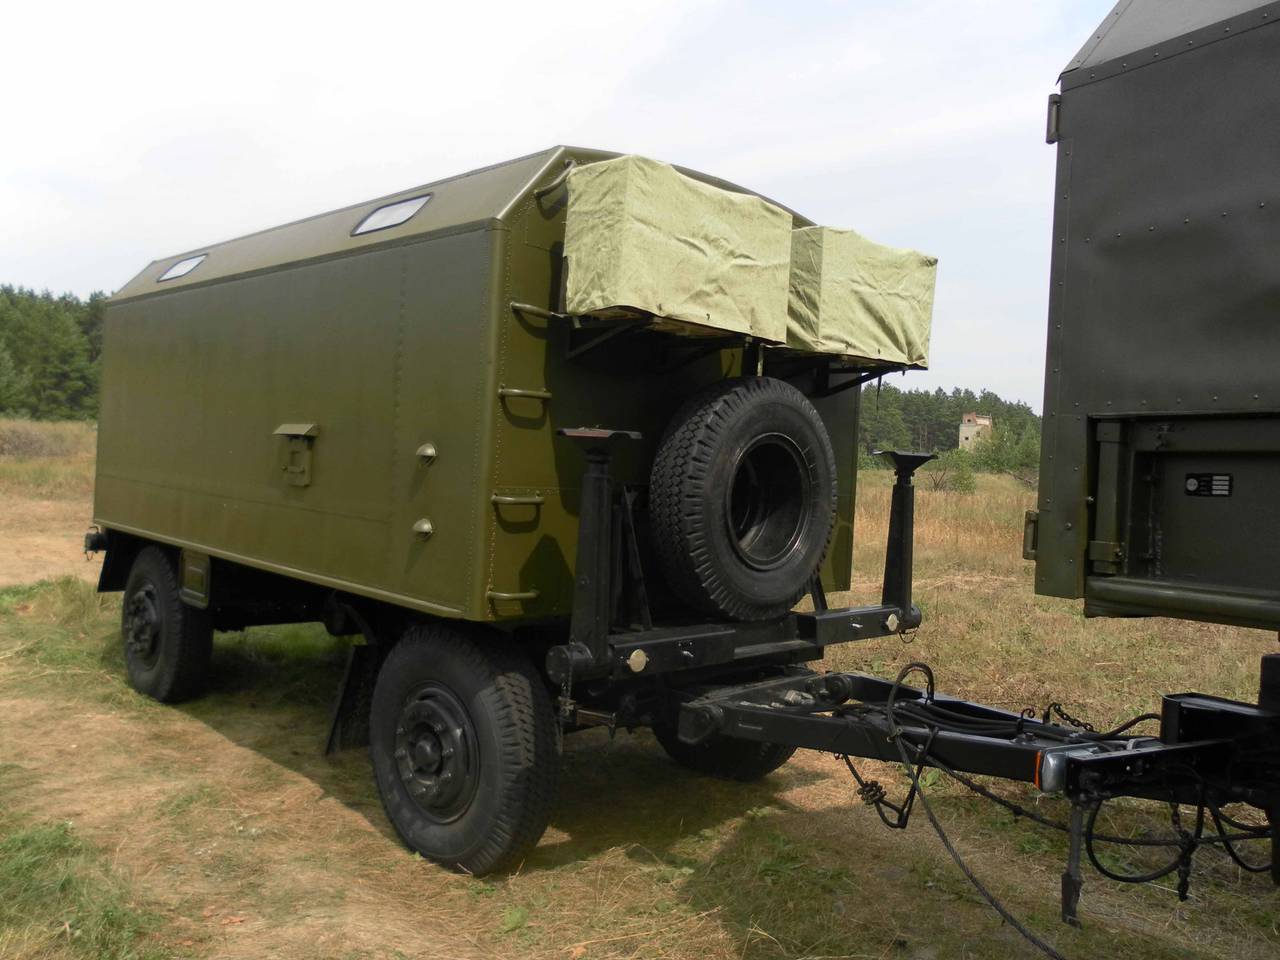 Mobile stand by radar P18 2 providing automatic detection